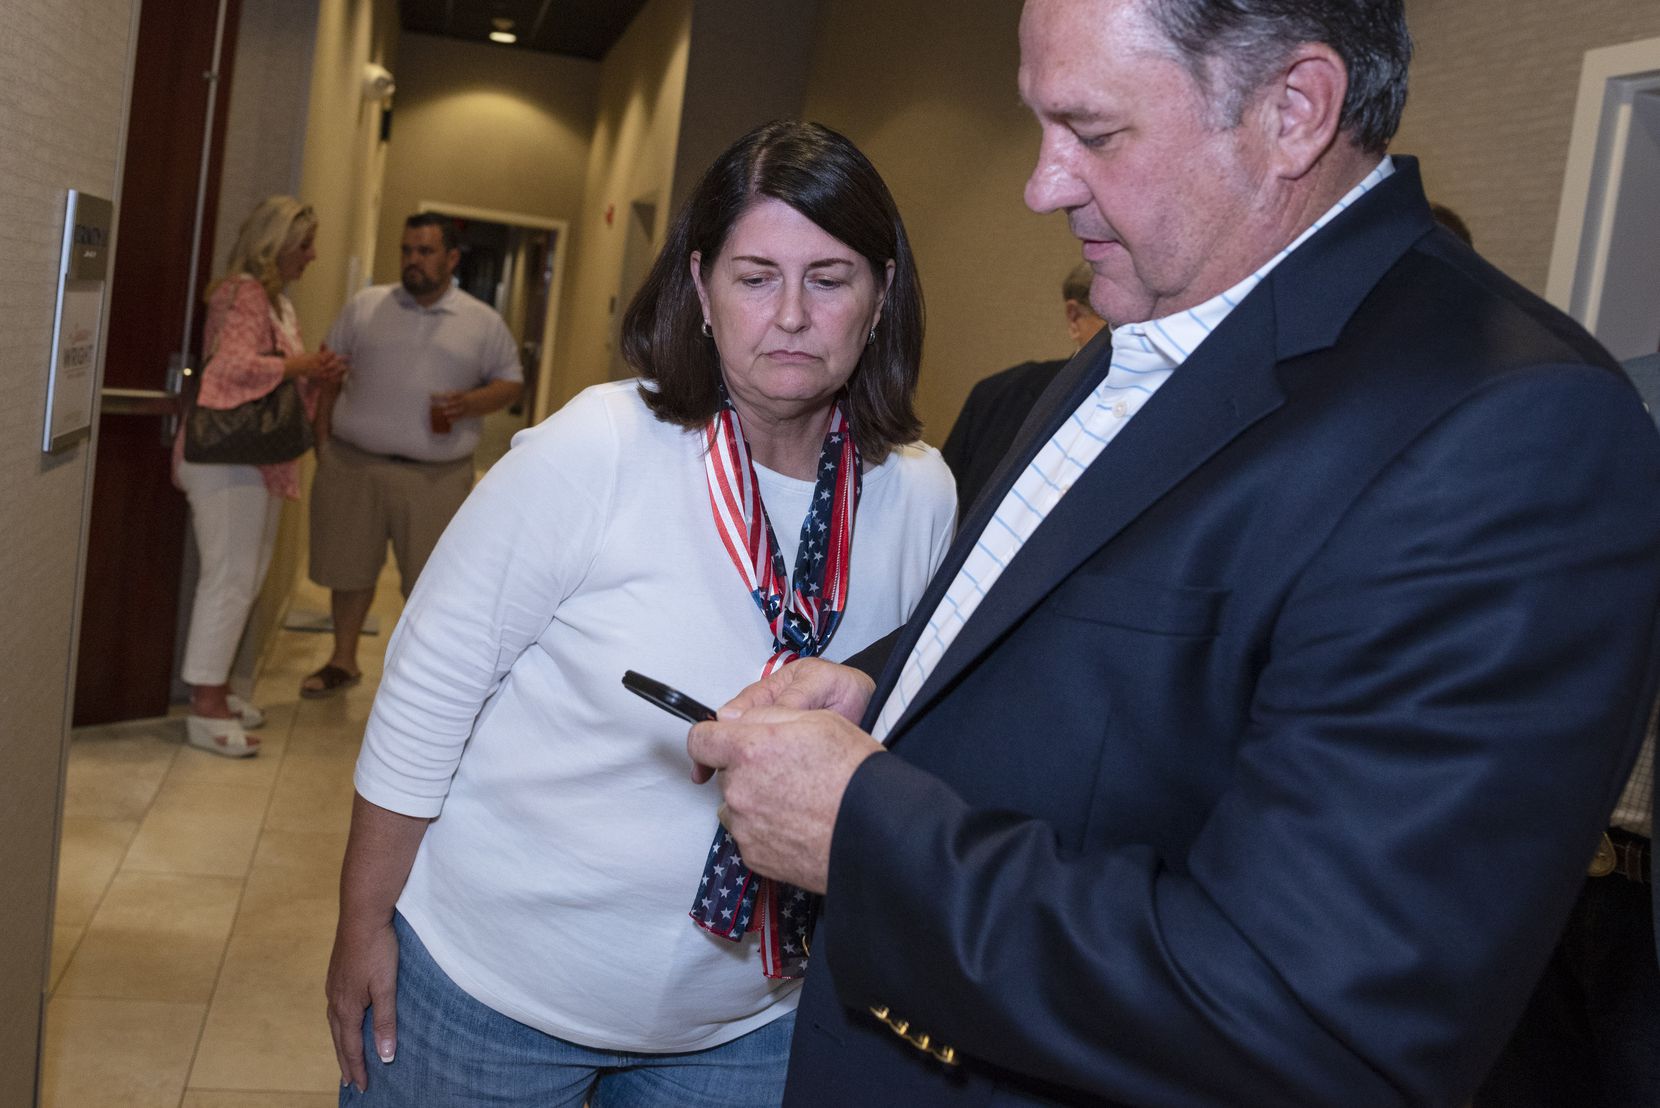 Susan Wright, District 6 Congressional candidate, left, peeks at the phone of Rick Barnes, Chairman of the Tarrant County Republican Party, as he showed Wright the latest poll results during an election night watch party at the Courtyard by Marriott hotel in Arlington, on Tuesday, July 27, 2021. Susan Wright was defeated by candidate Jake Ellzey.